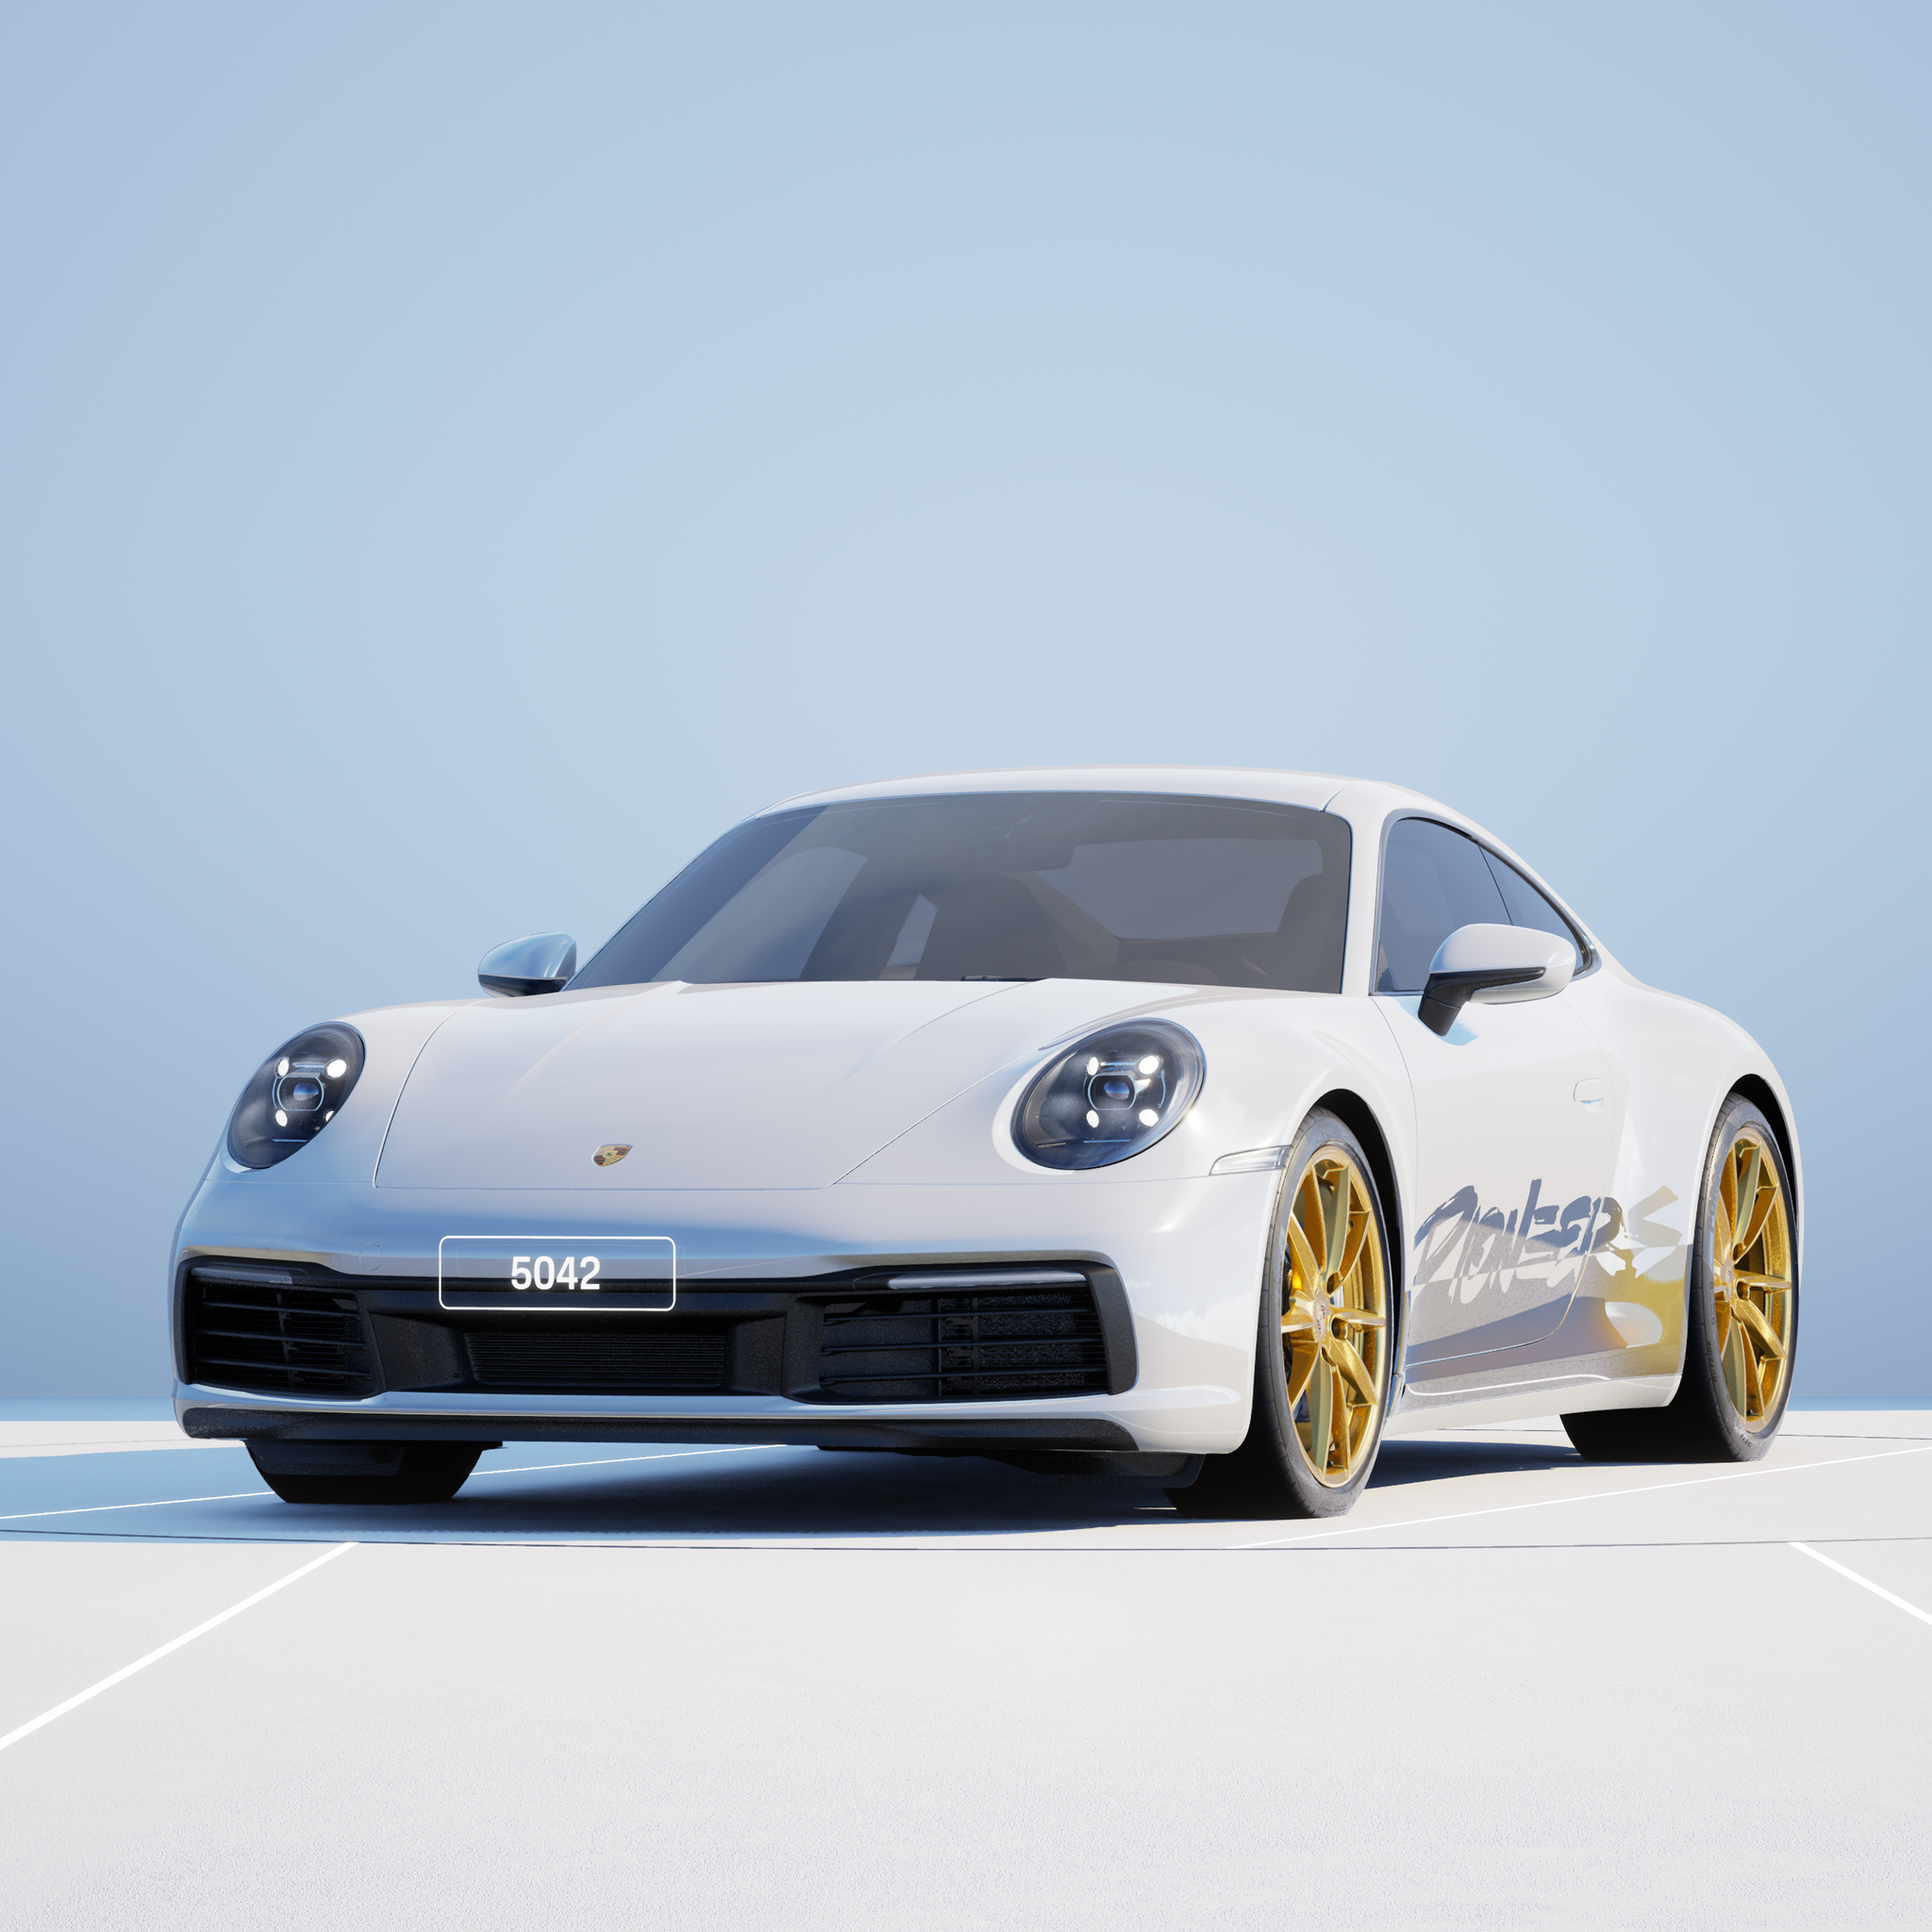 The PORSCHΞ 911 5042 image in phase